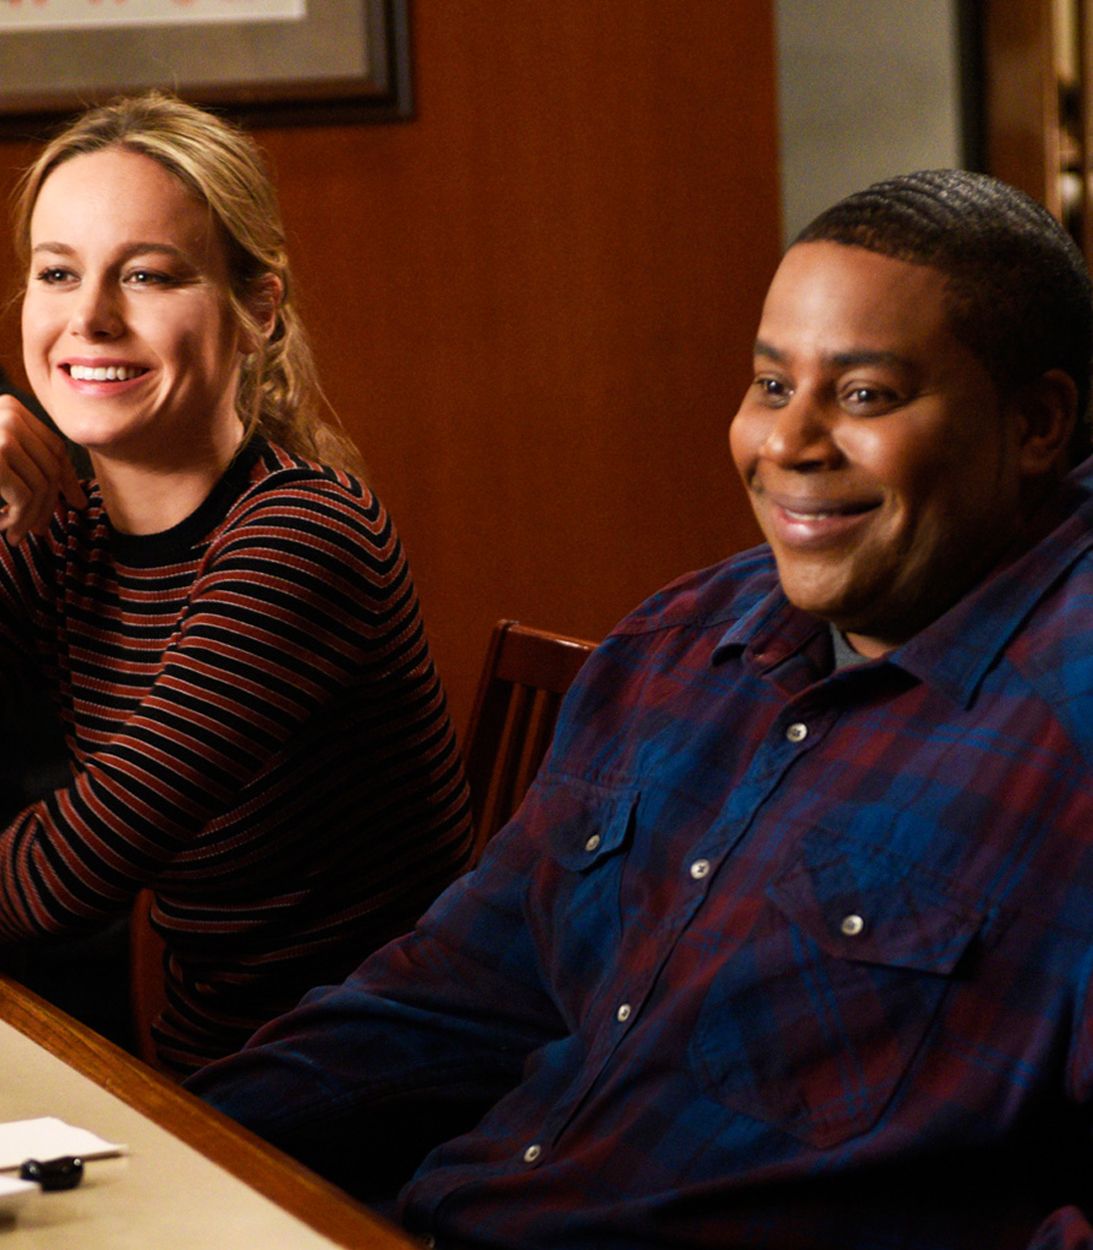 Brie Larson and Kenan Thompson vertical